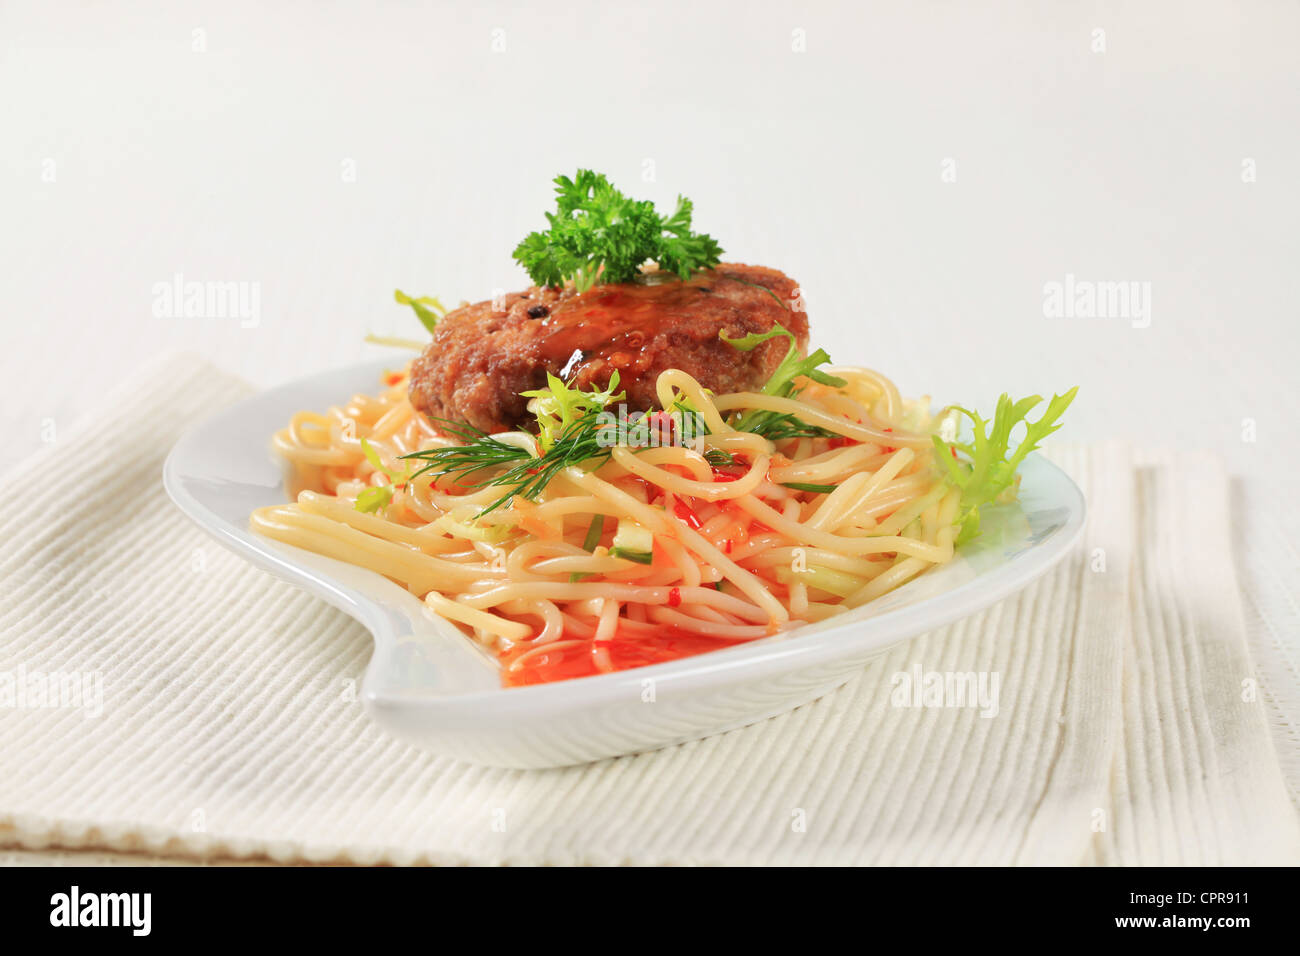 Meat patty with spaghetti and spicy sauce Stock Photo